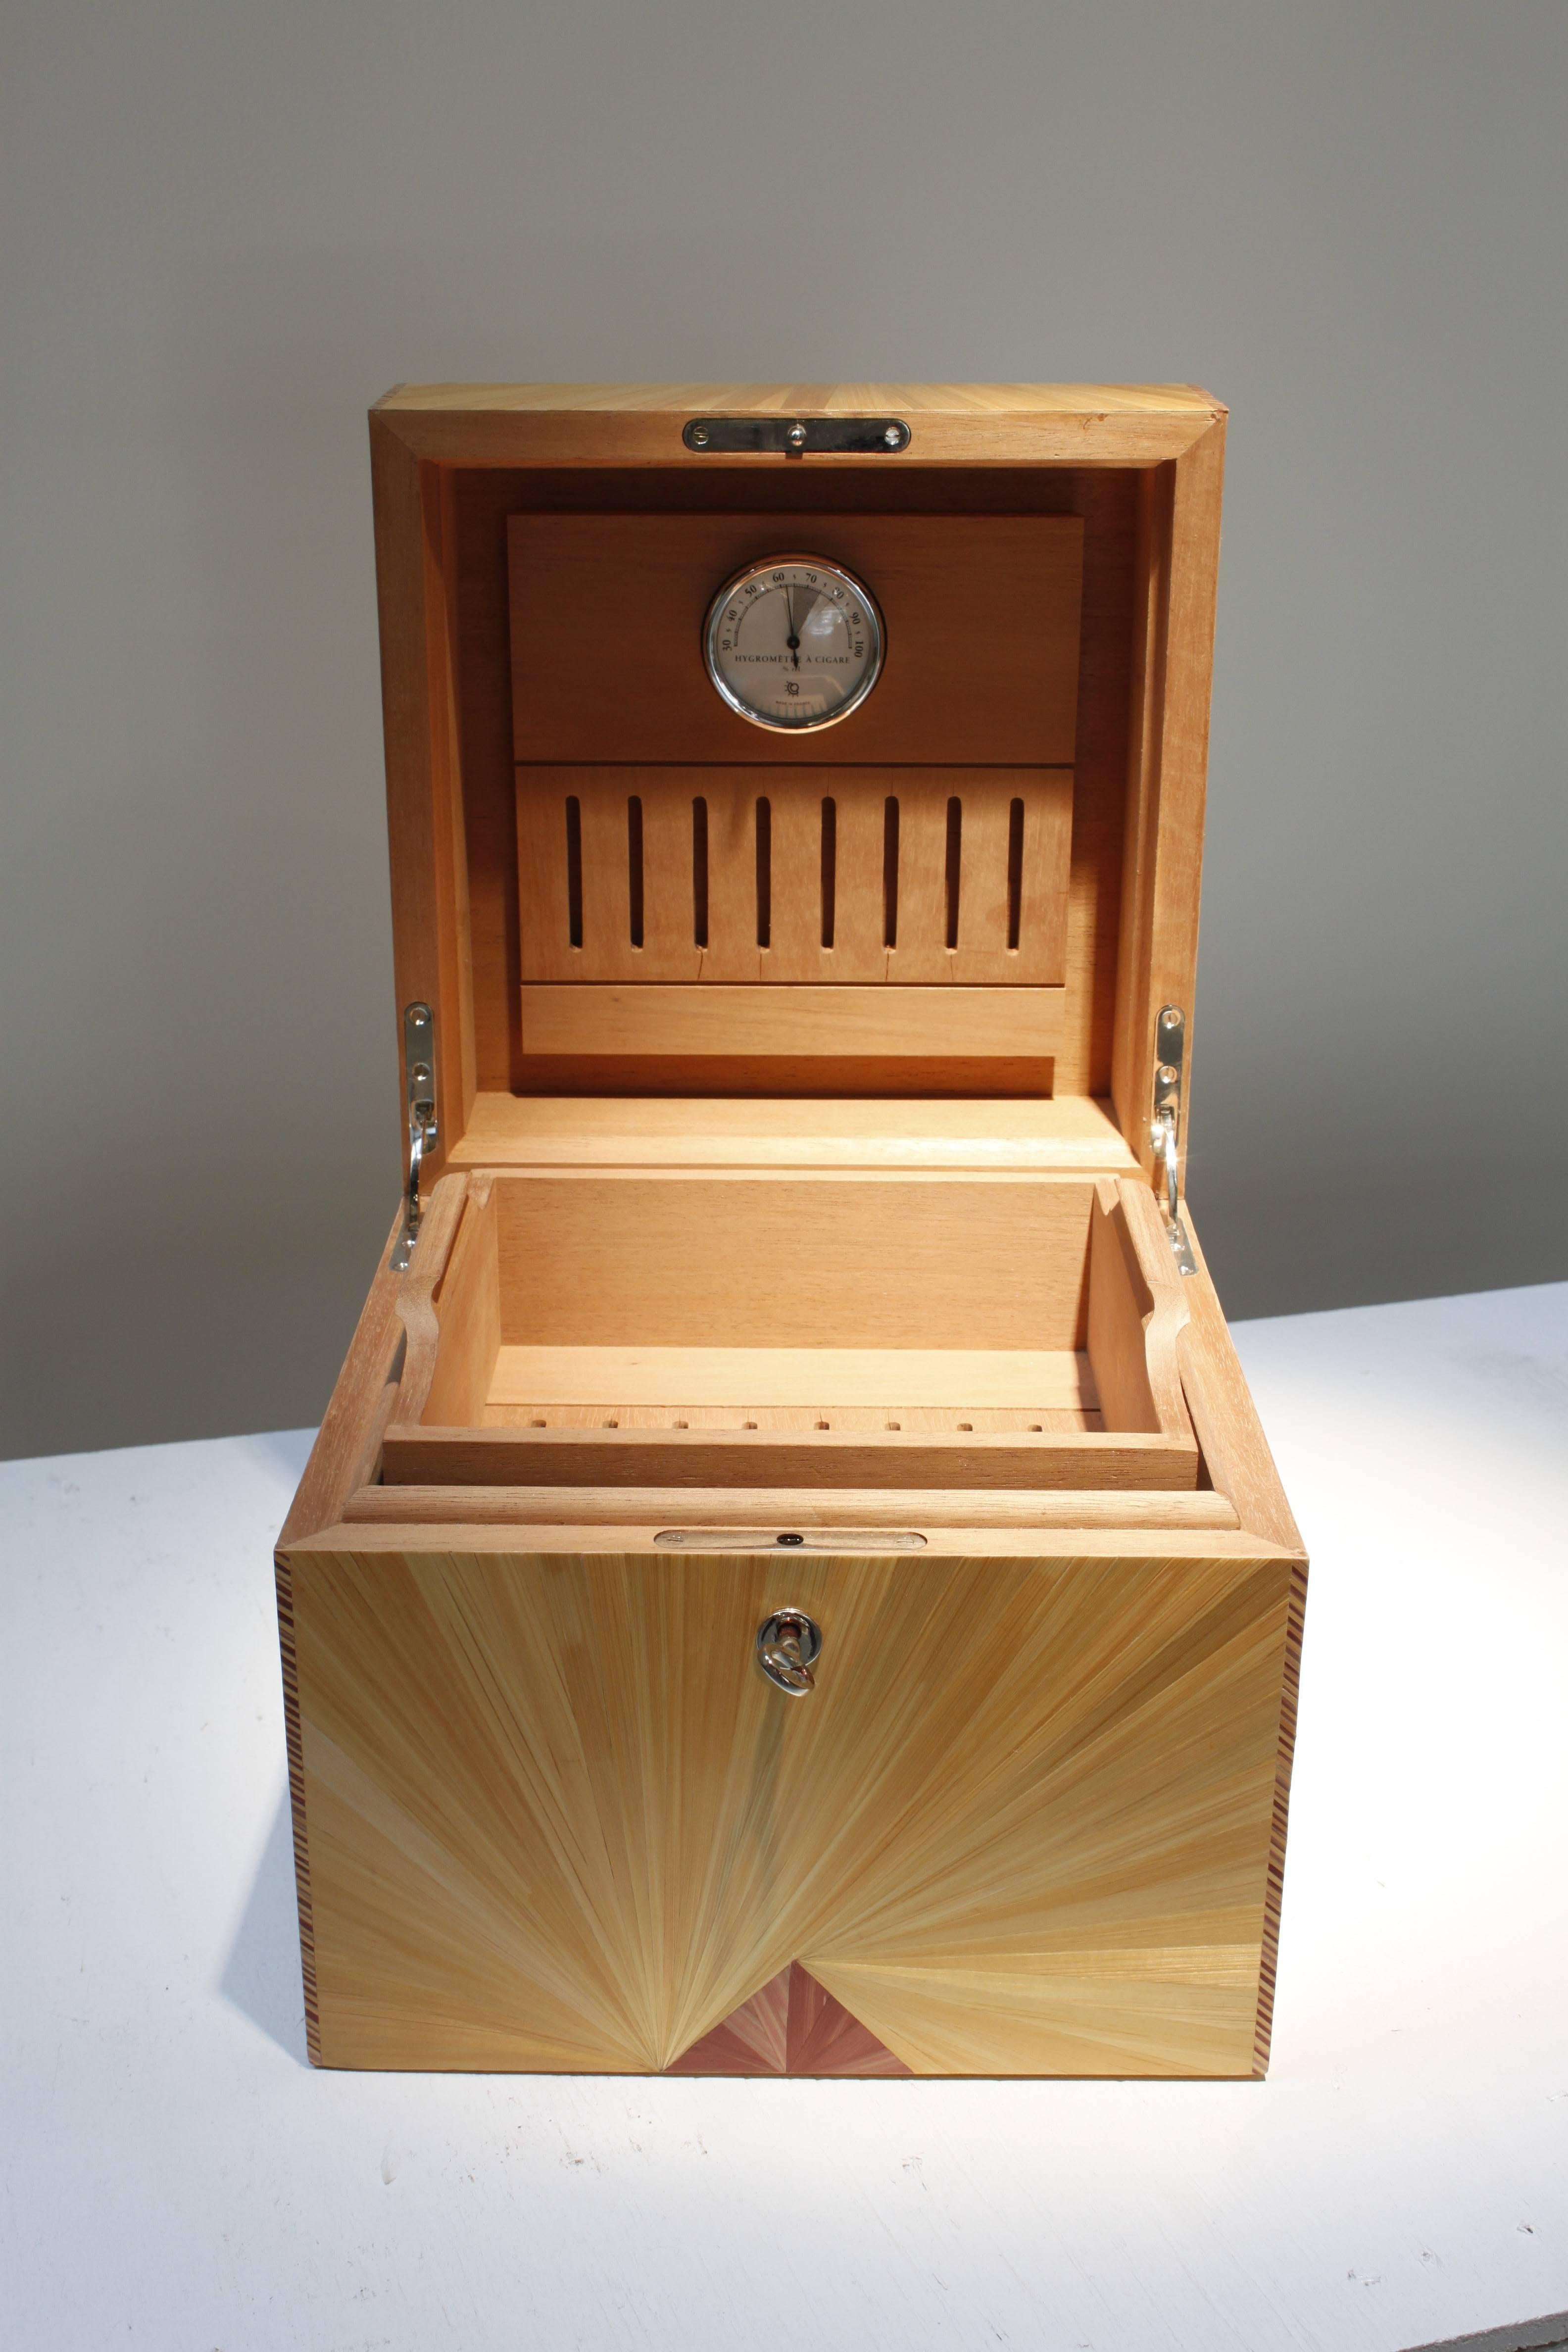 This cigar box, by Lison de Caunes, is done in straw marquetry. This item comes with the key and is lockable, with a built-in humidifier. This is part of the Marquis de Lafayette Collection.